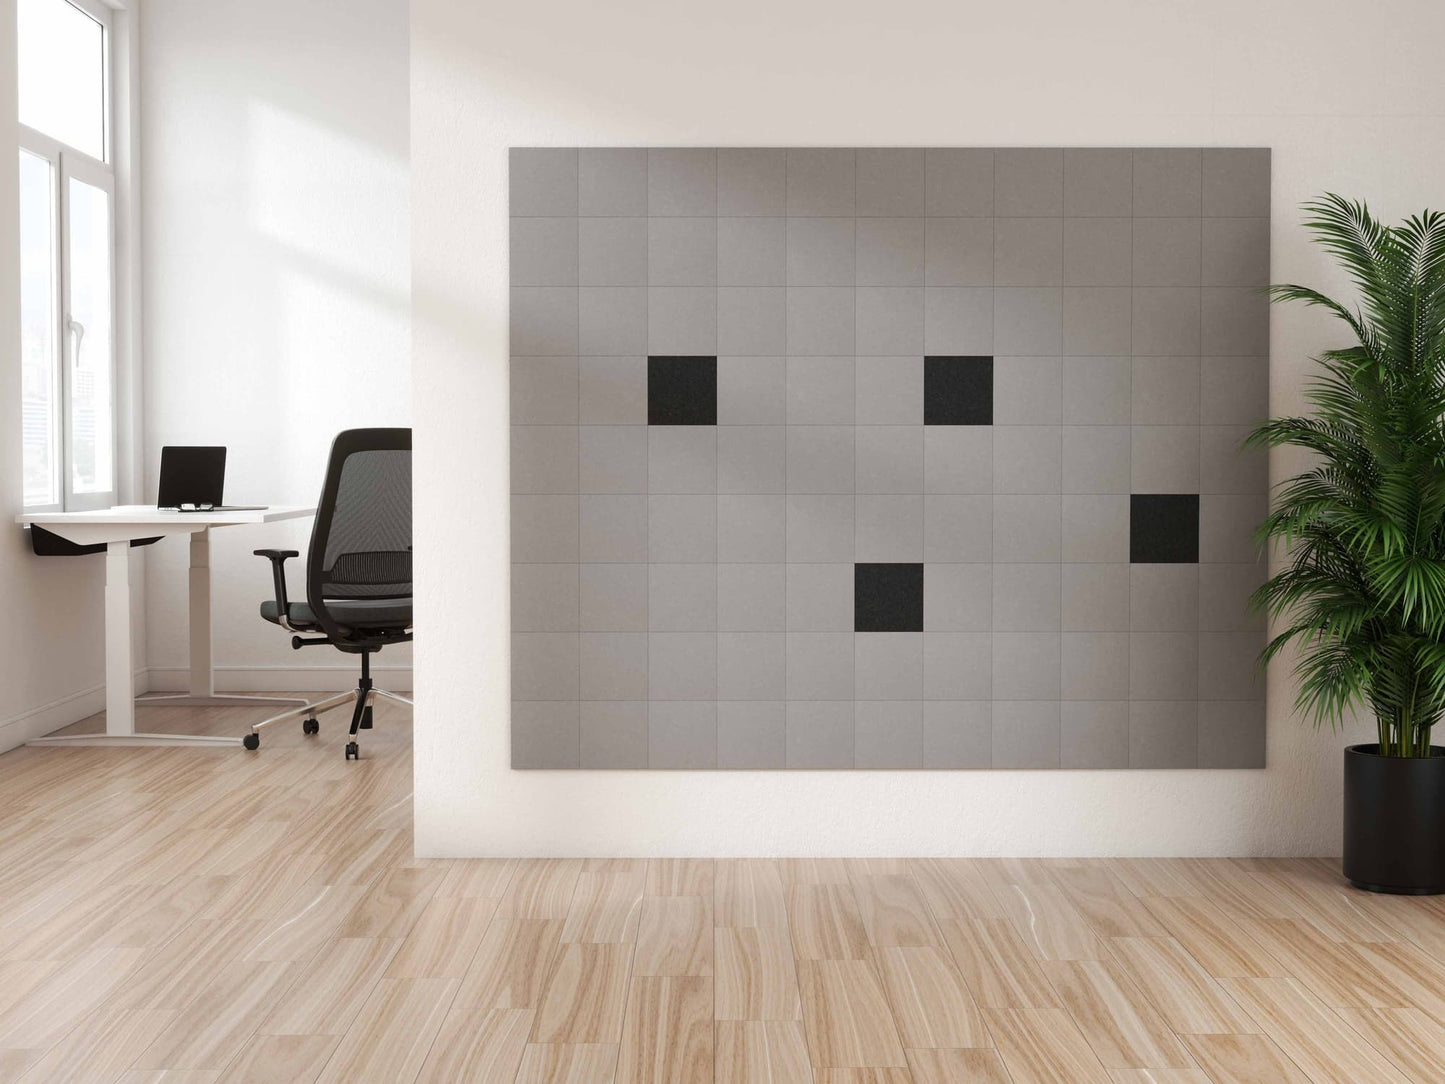  Acoustic felt wall tiles - square - room view render